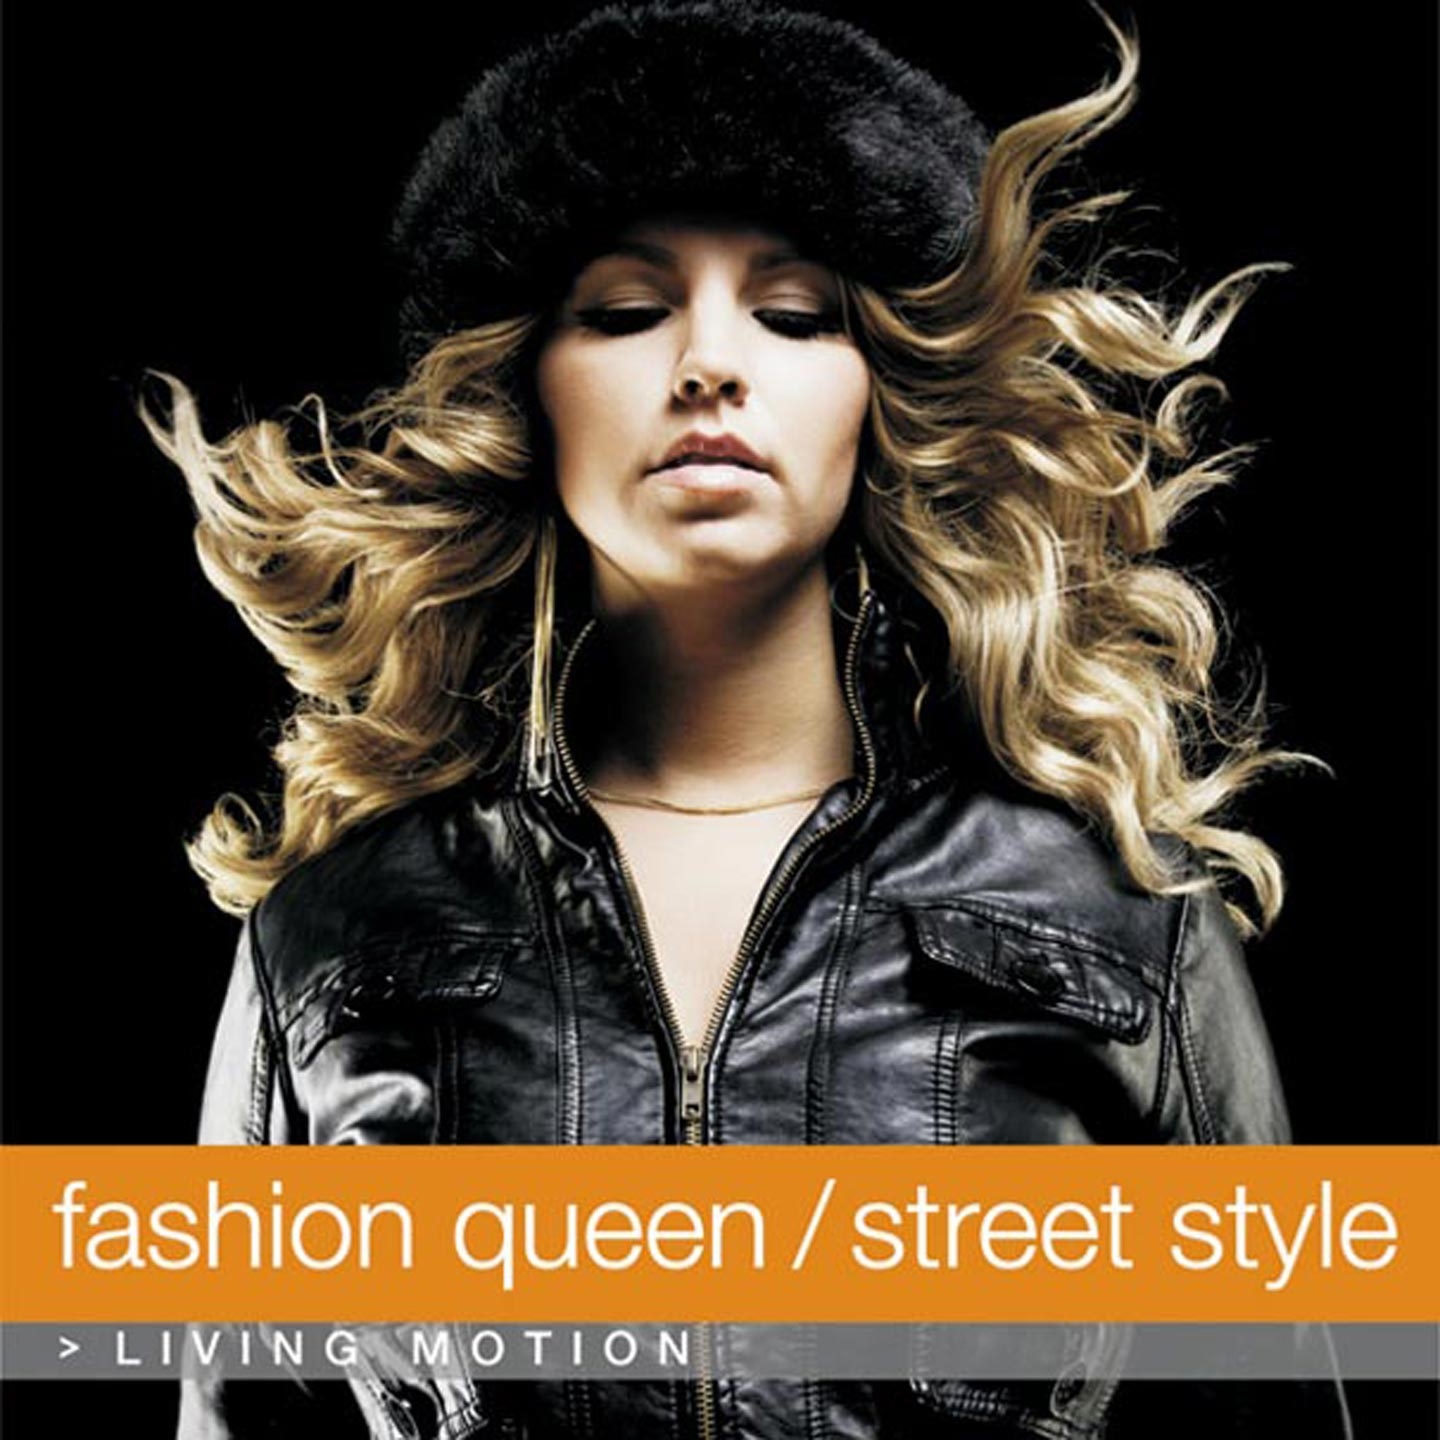 Fashion Queen / Street Style: Living Motion (Hip Hop, R'n'B, Young Fashion)